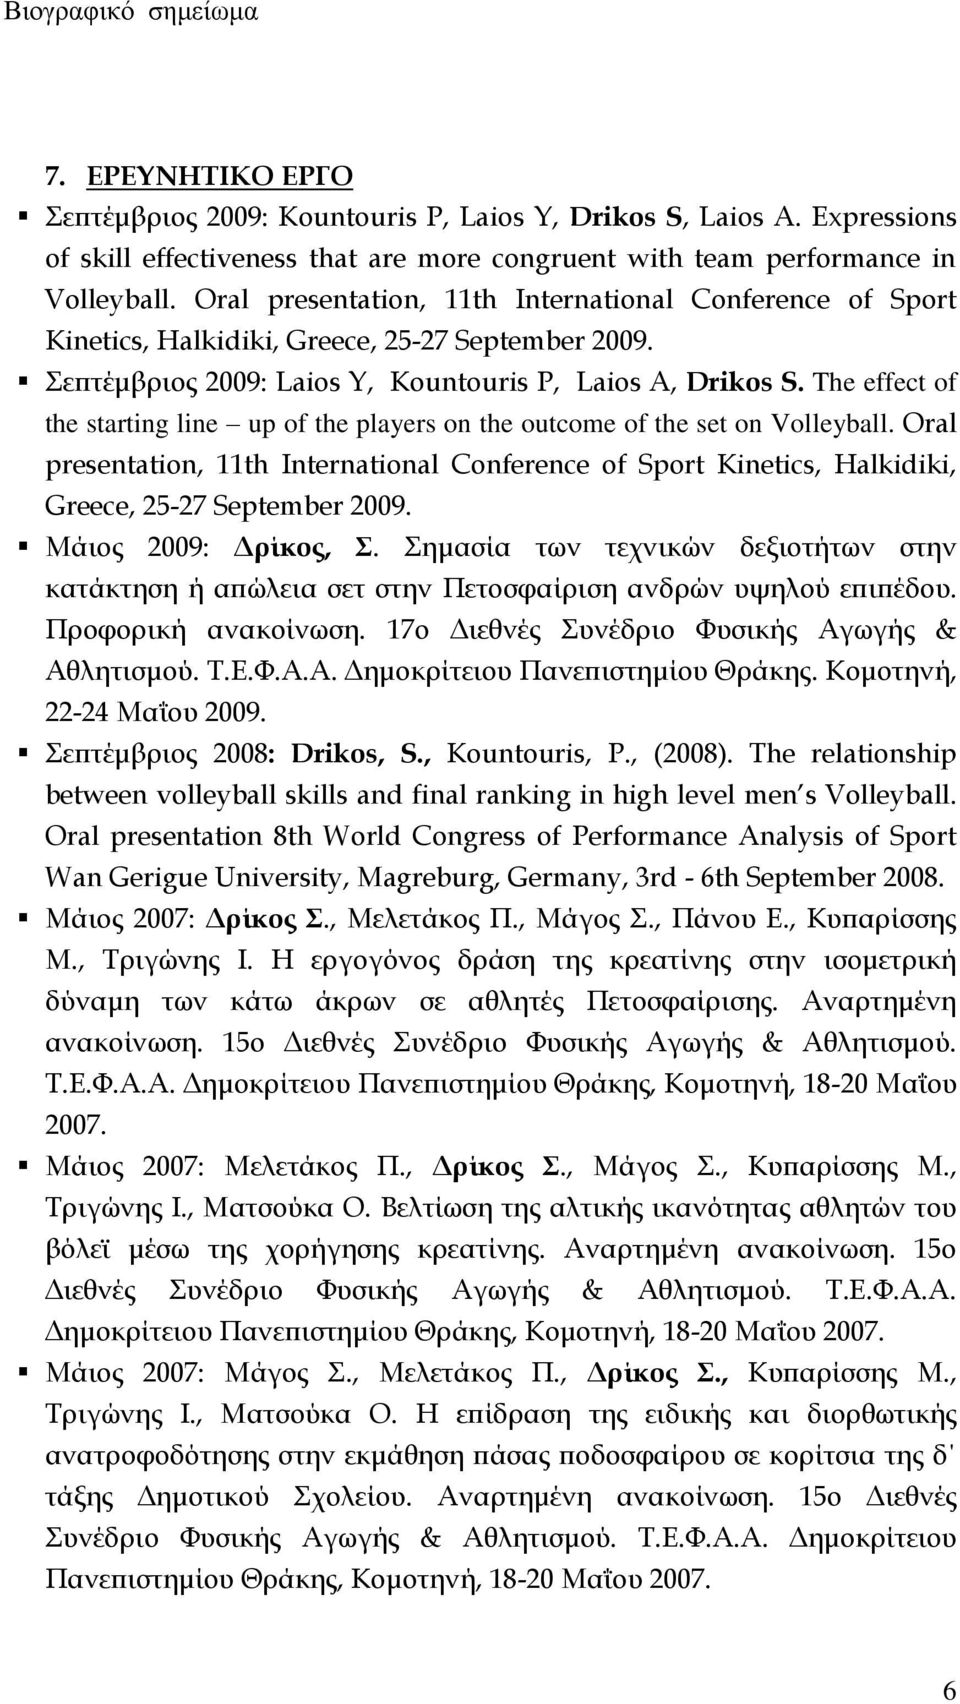 The effect of the starting line up of the players on the outcome of the set on Volleyball. Oral presentation, 11th International Conference of Sport Kinetics, Halkidiki, Greece, 25-27 September 2009.